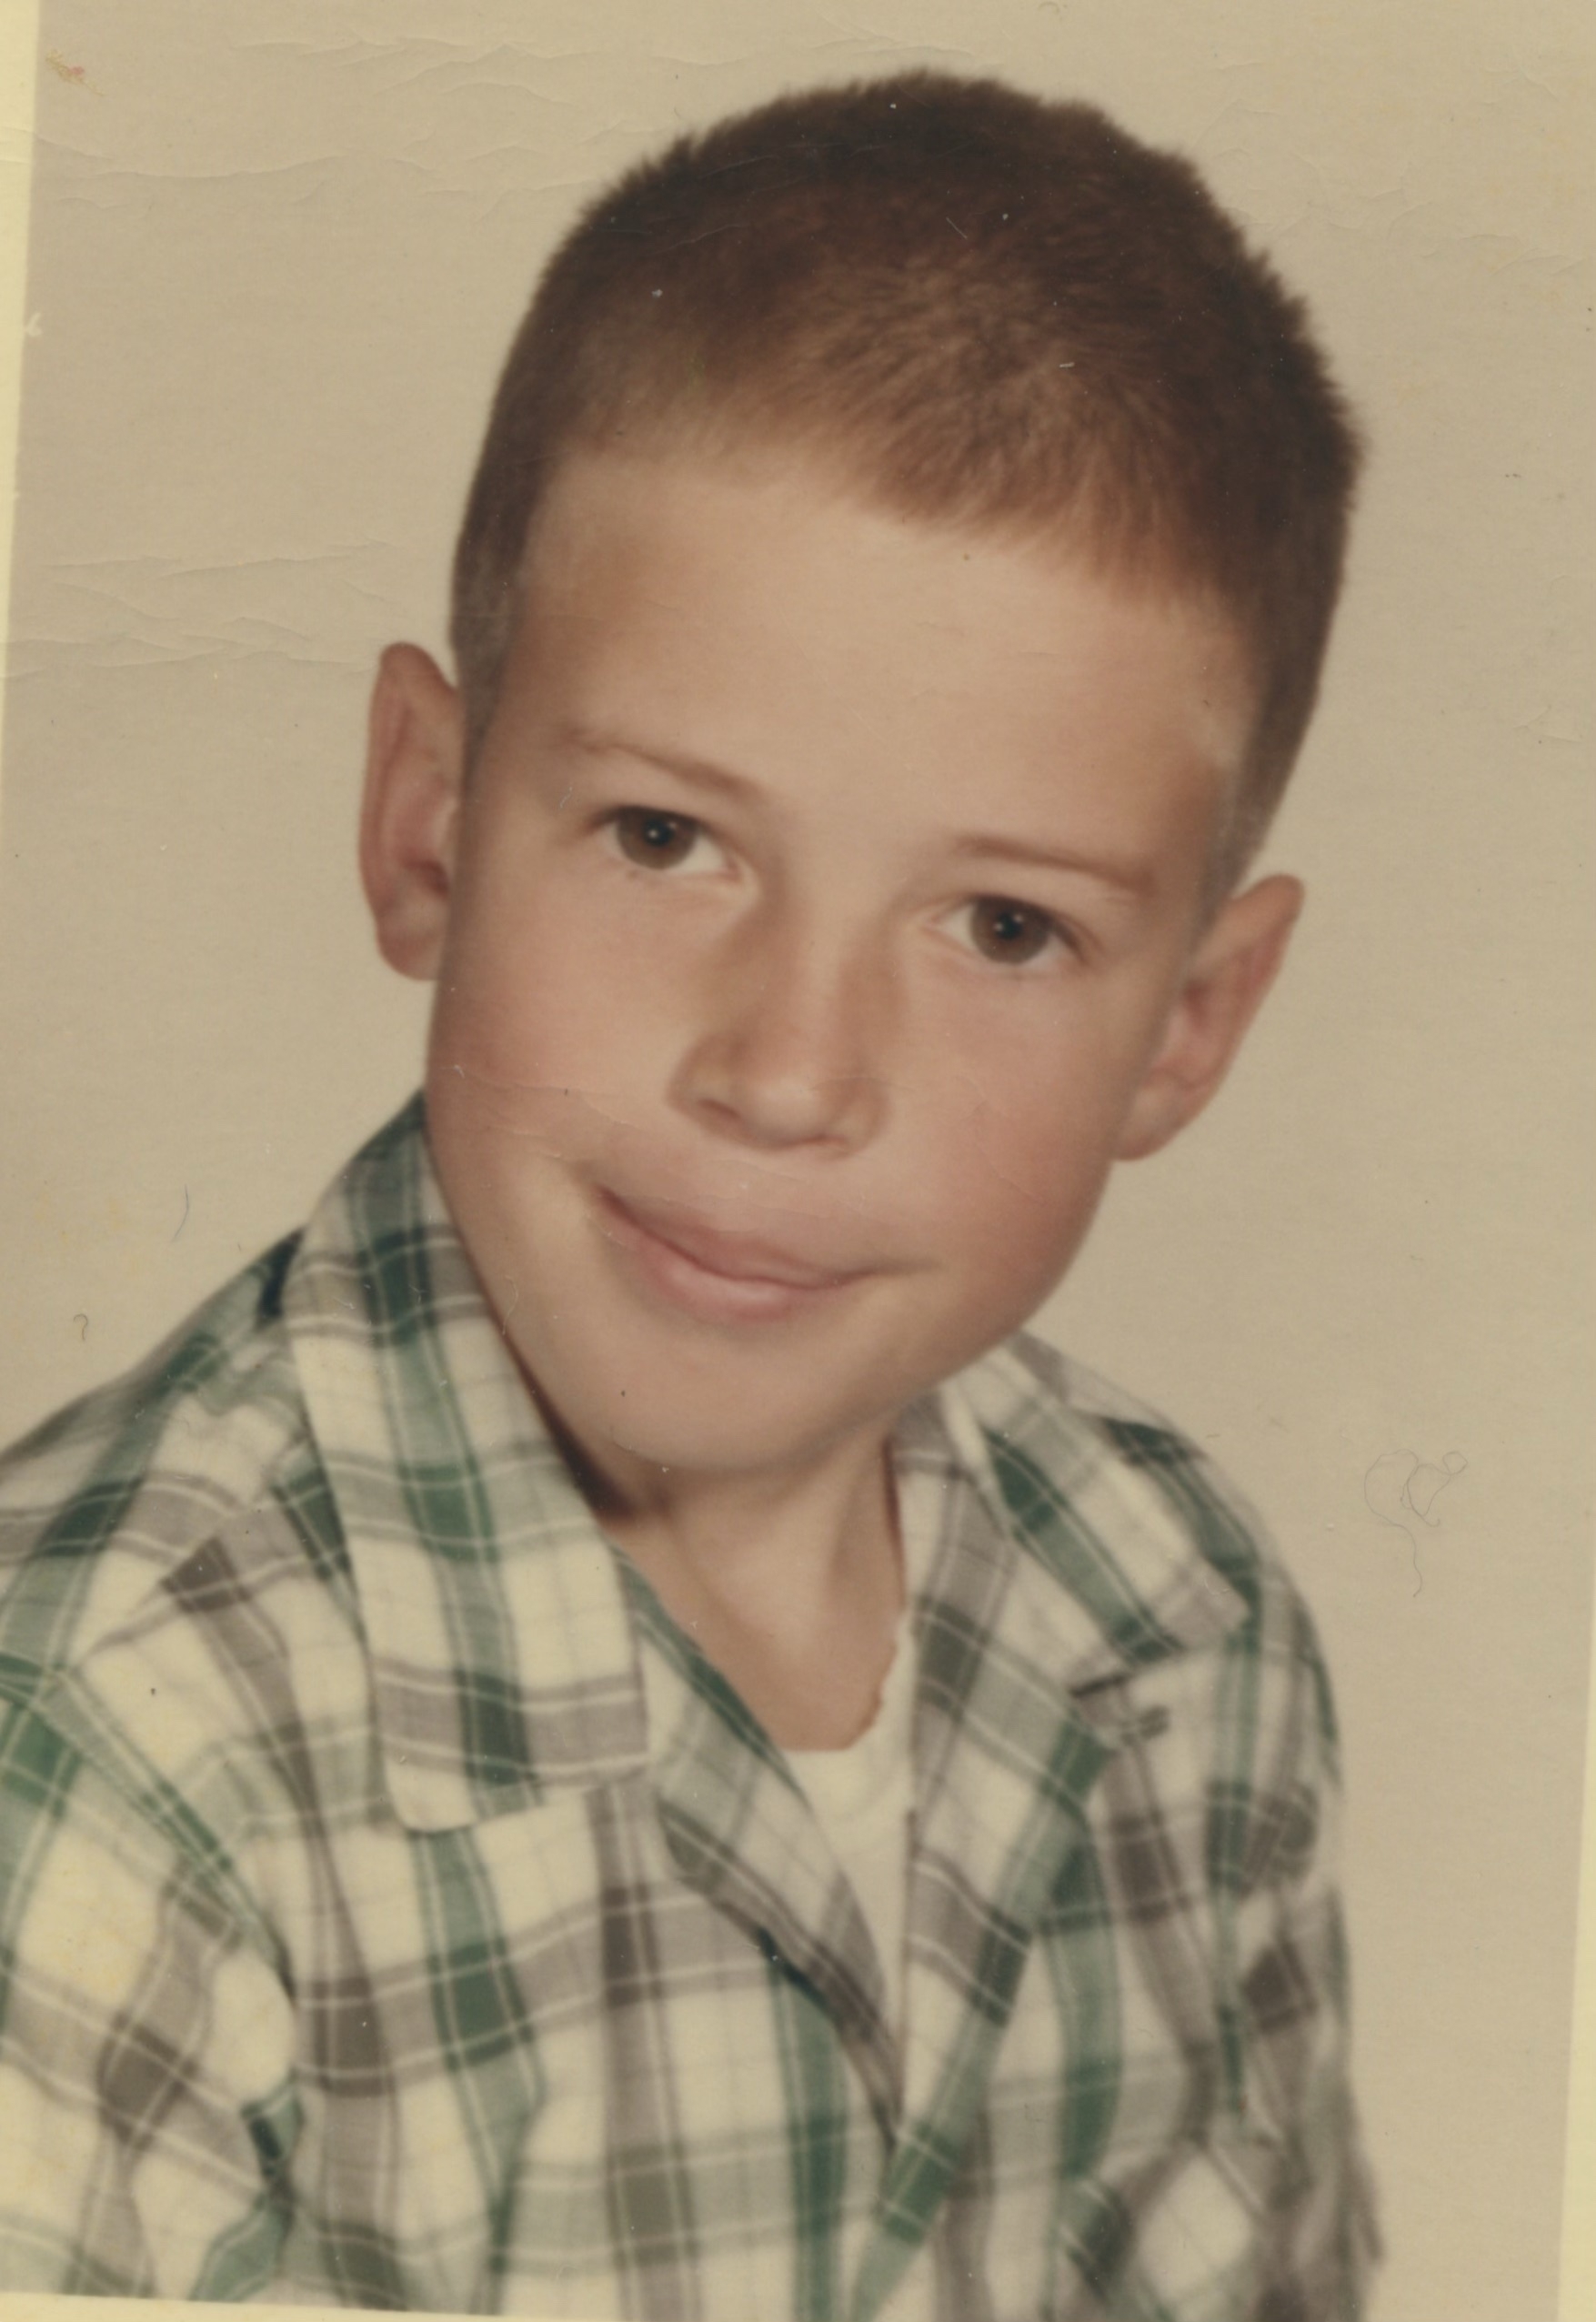 Portrait of a young boy with short hair wearing a green plaid shirt.